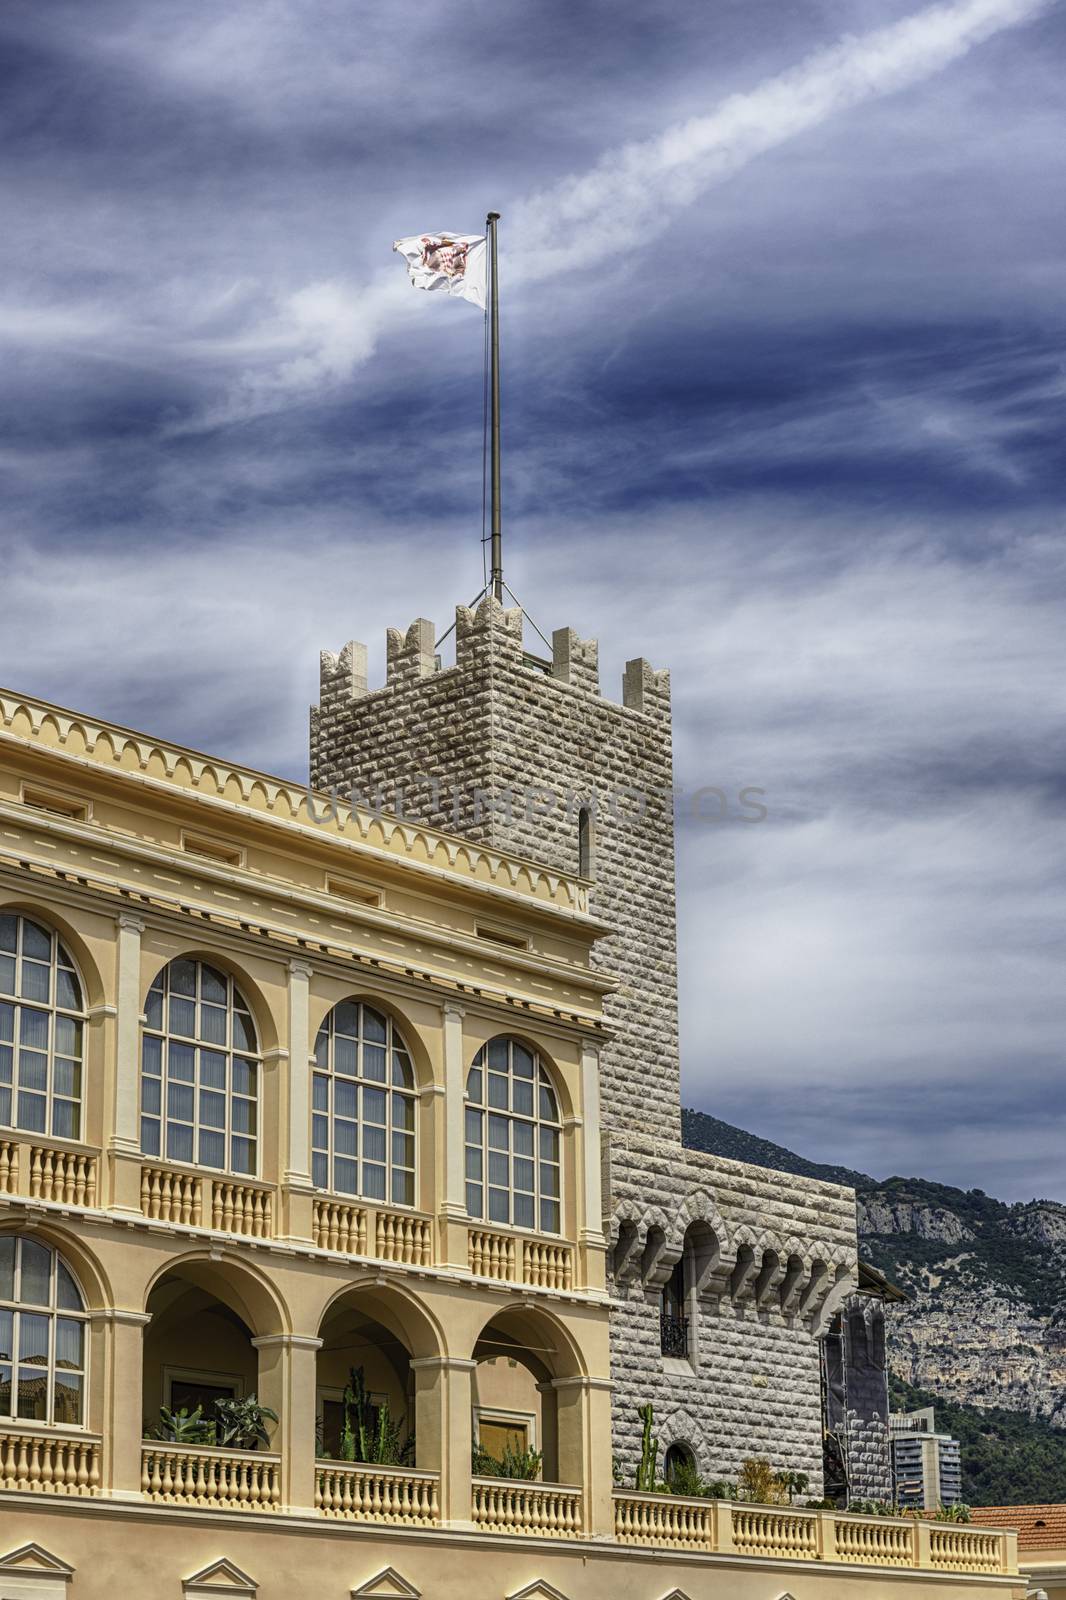 Detail with the tower of Prince's Palace of Monaco, located in Monaco City, aka Le Rocher or The Rock, as seen on August 13, 2019. It's the official residence of the Sovereign Prince of Monaco